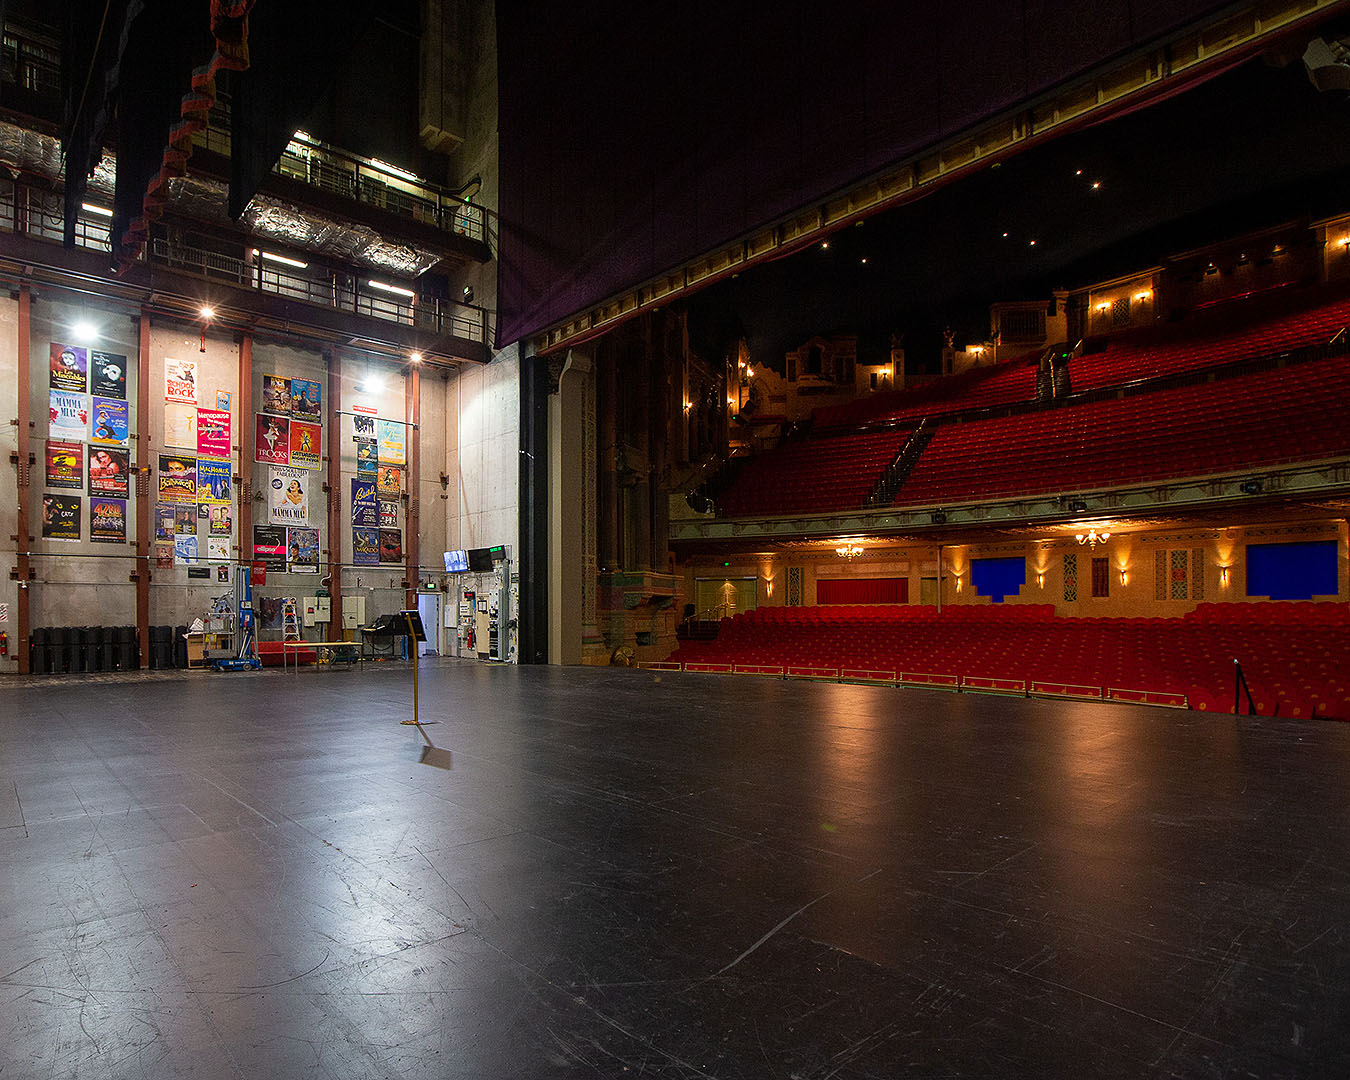 The Civic Theatre is seen from the stage.